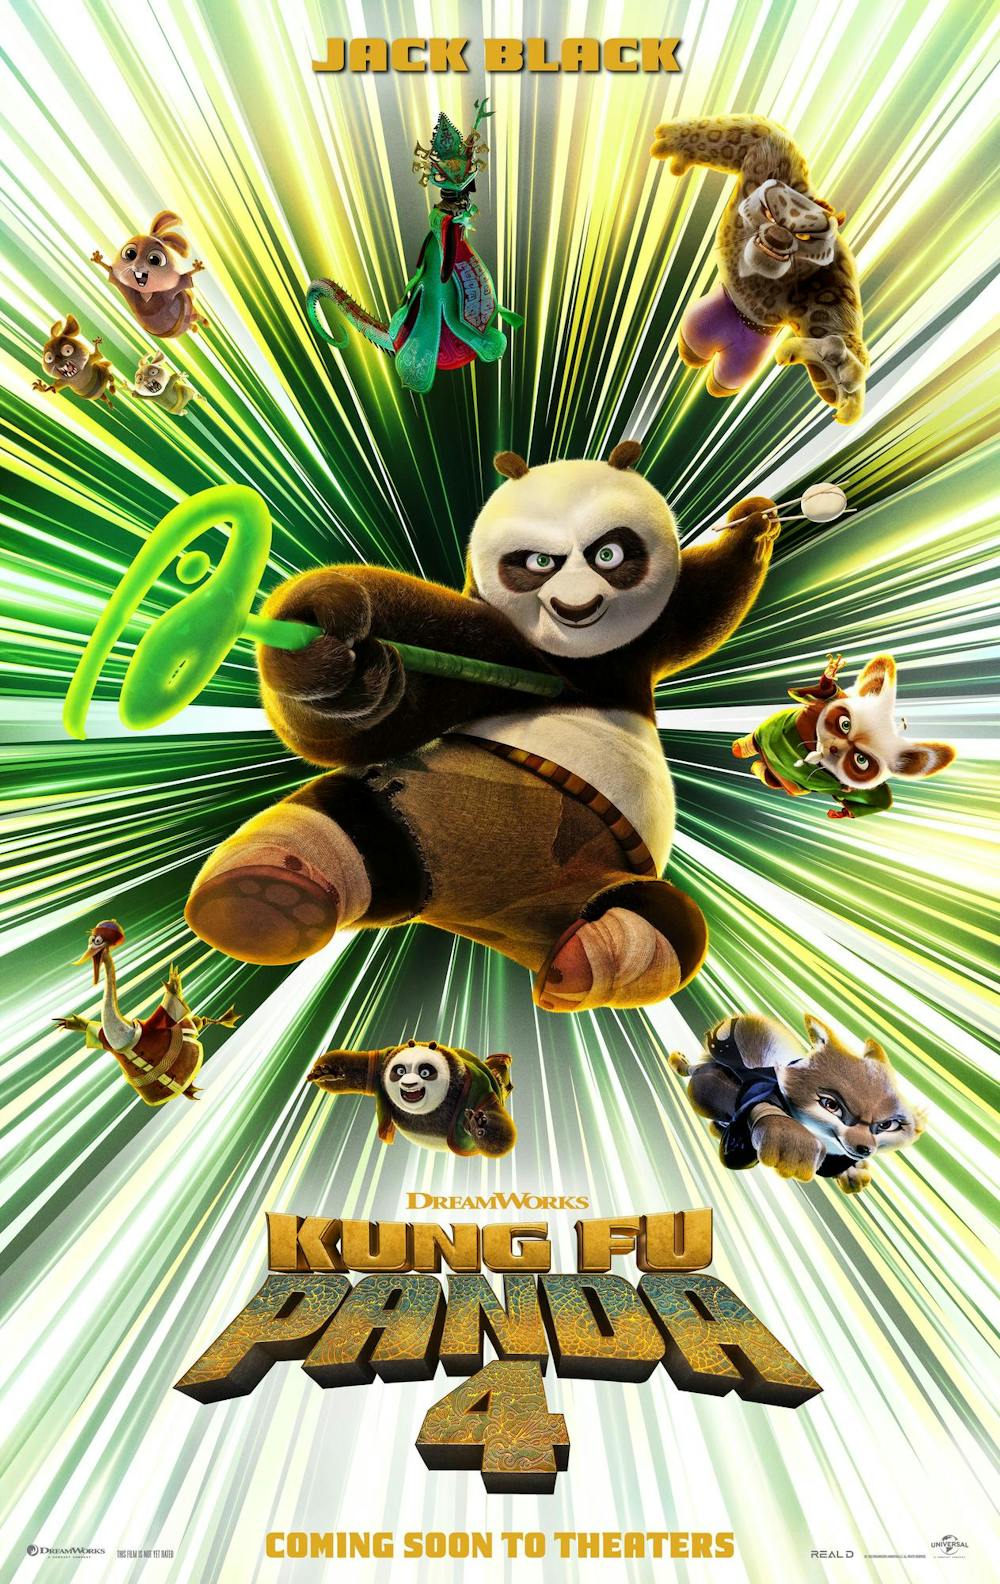 Like the initial audiences of the first “Kung Fu Panda” film, Po may have matured in his responsibilities but is still youthful and fun-loving at heart.

Courtesy of IMDB